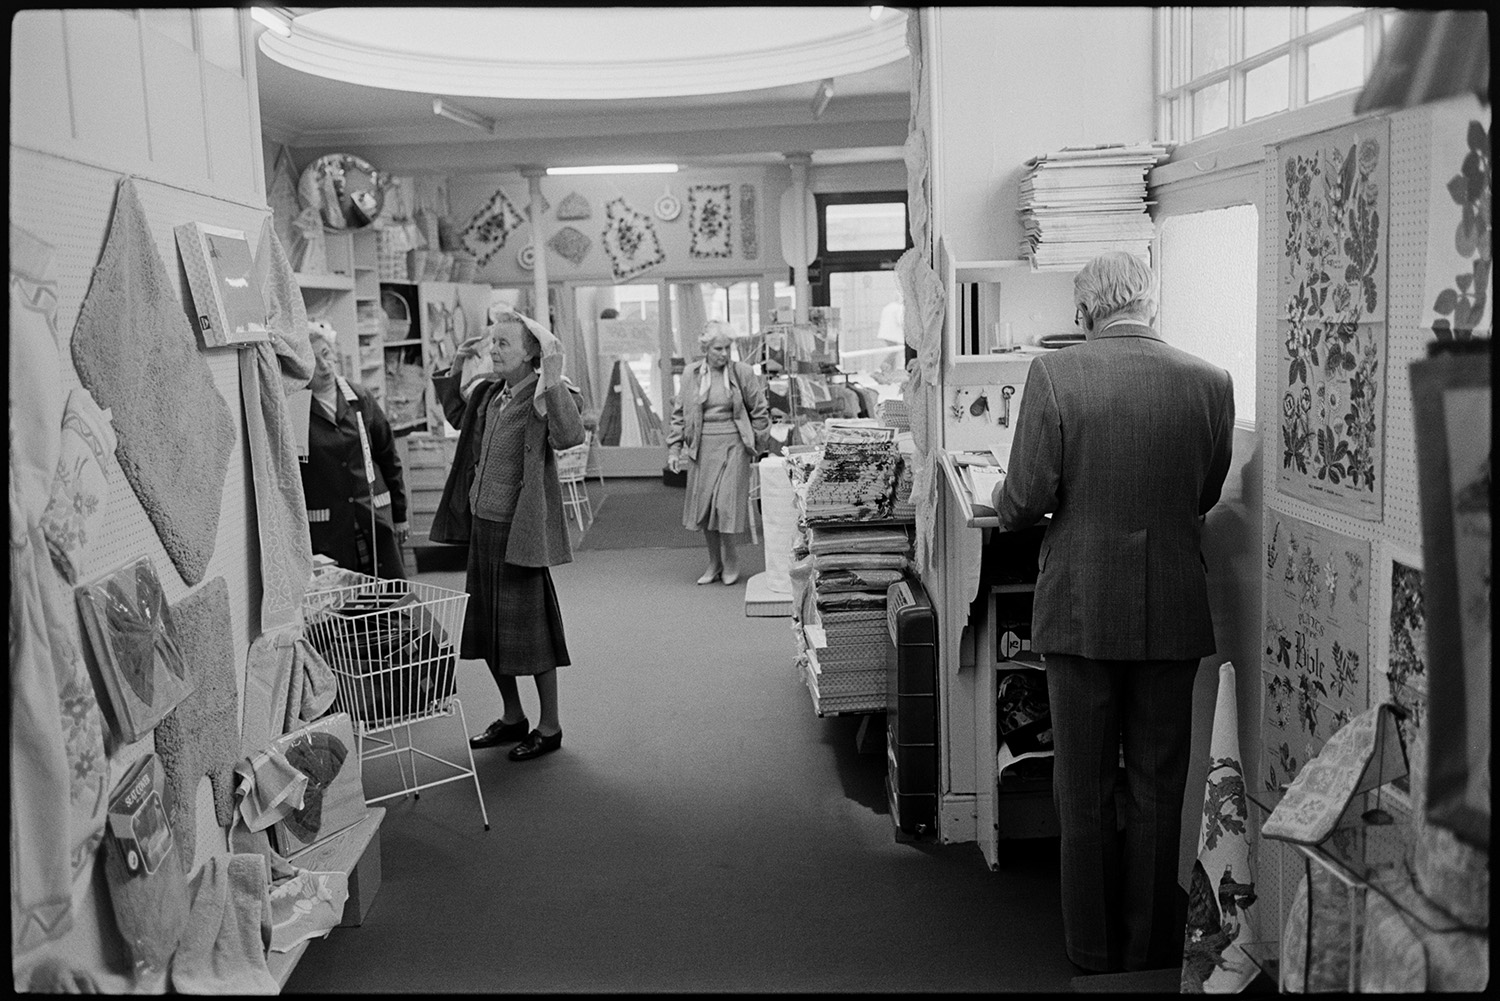 Interior of clothes shop. Various counters, proprietor chatting, window and hat display. 
[Women shopping in Trapnells clothes shop in Bideford High Street. One woman is trying on a headscarf. A man is stood at a small desk in the foreground. Various goods are on display in the shop, including tea towels and bath mats.]